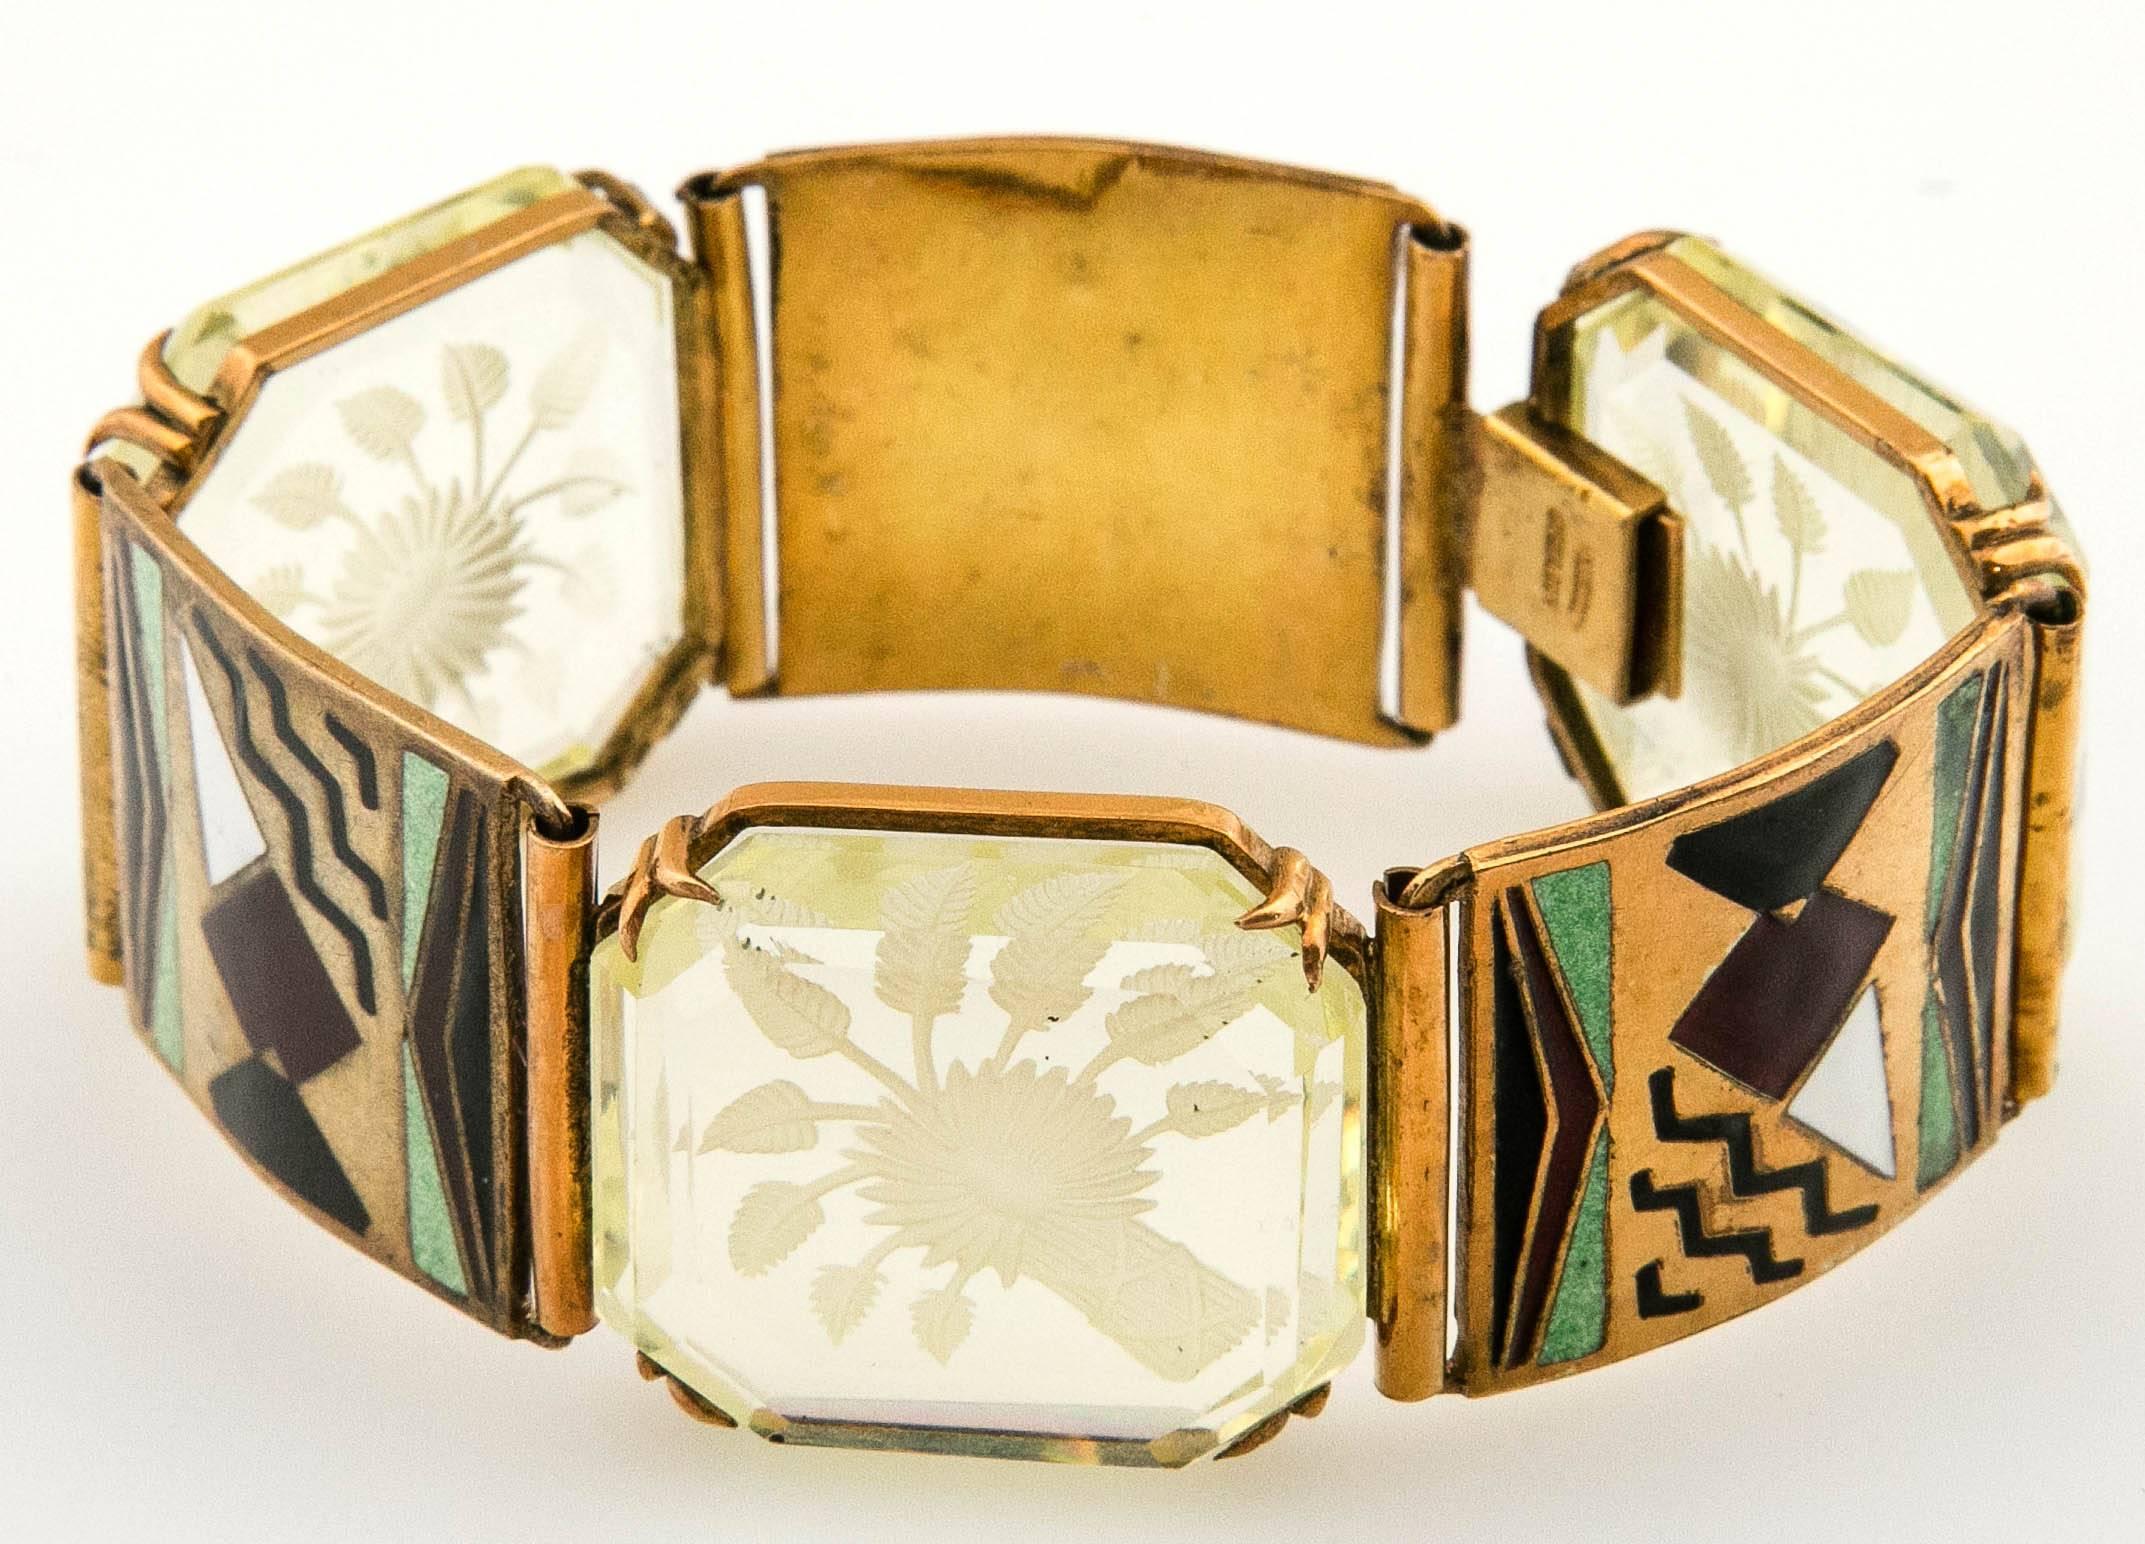 Art Deco Enamel and Rock Crystal Bracelet  In Good Condition For Sale In Stamford, CT